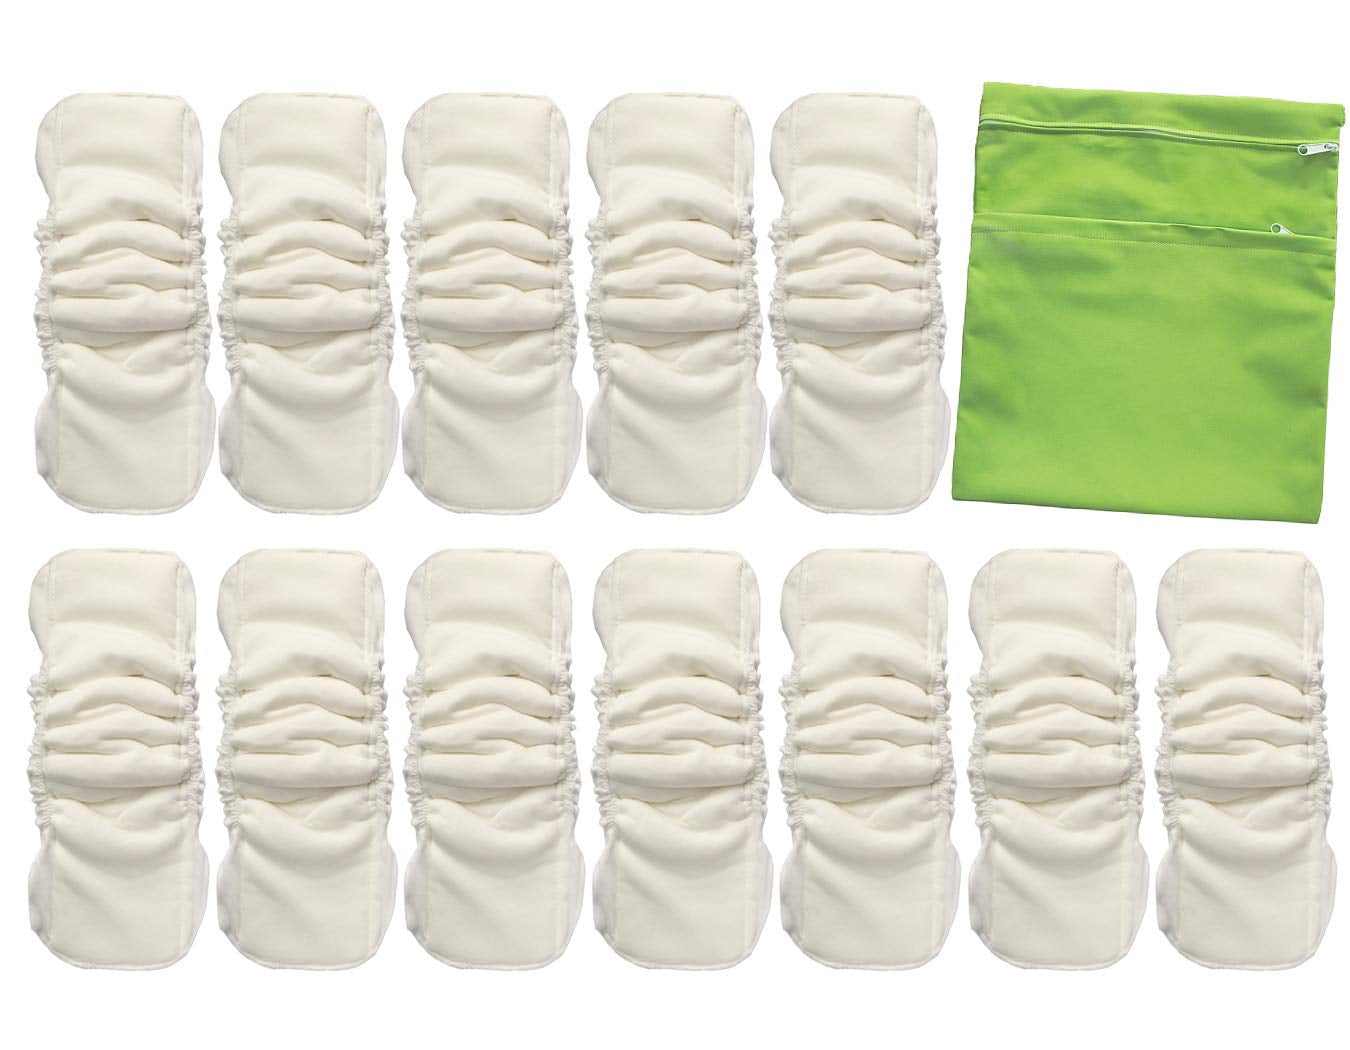 Soft 12 Layers Bamboo Fiber Insert Liners for Cloth Diaper Baby